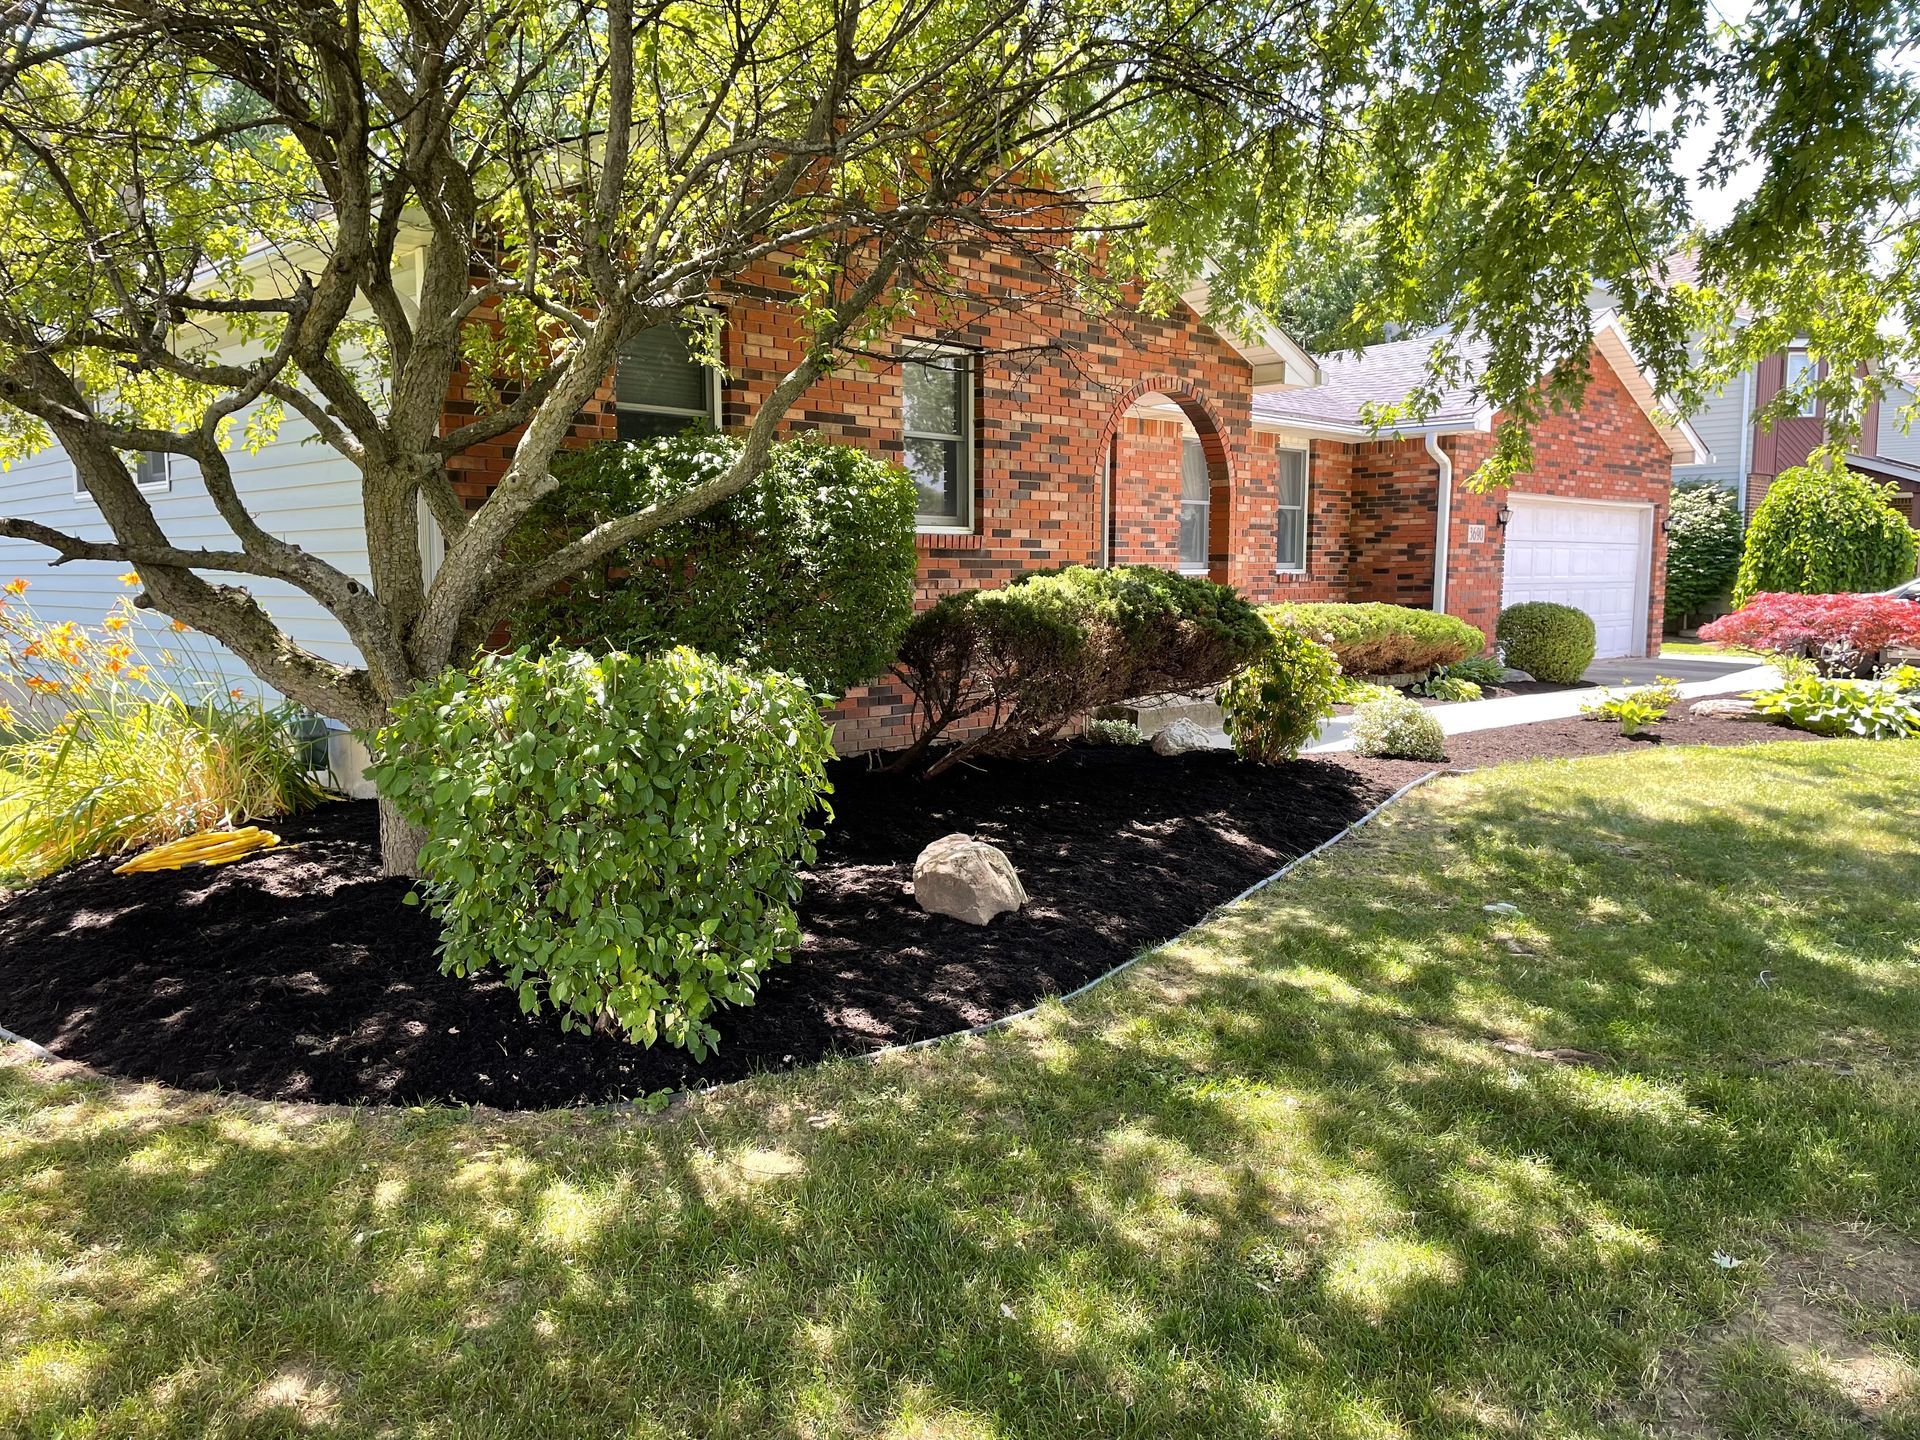 Well-maintained front yard of a brick house with mulched garden beds, shrubs, and a mature tree creating shade